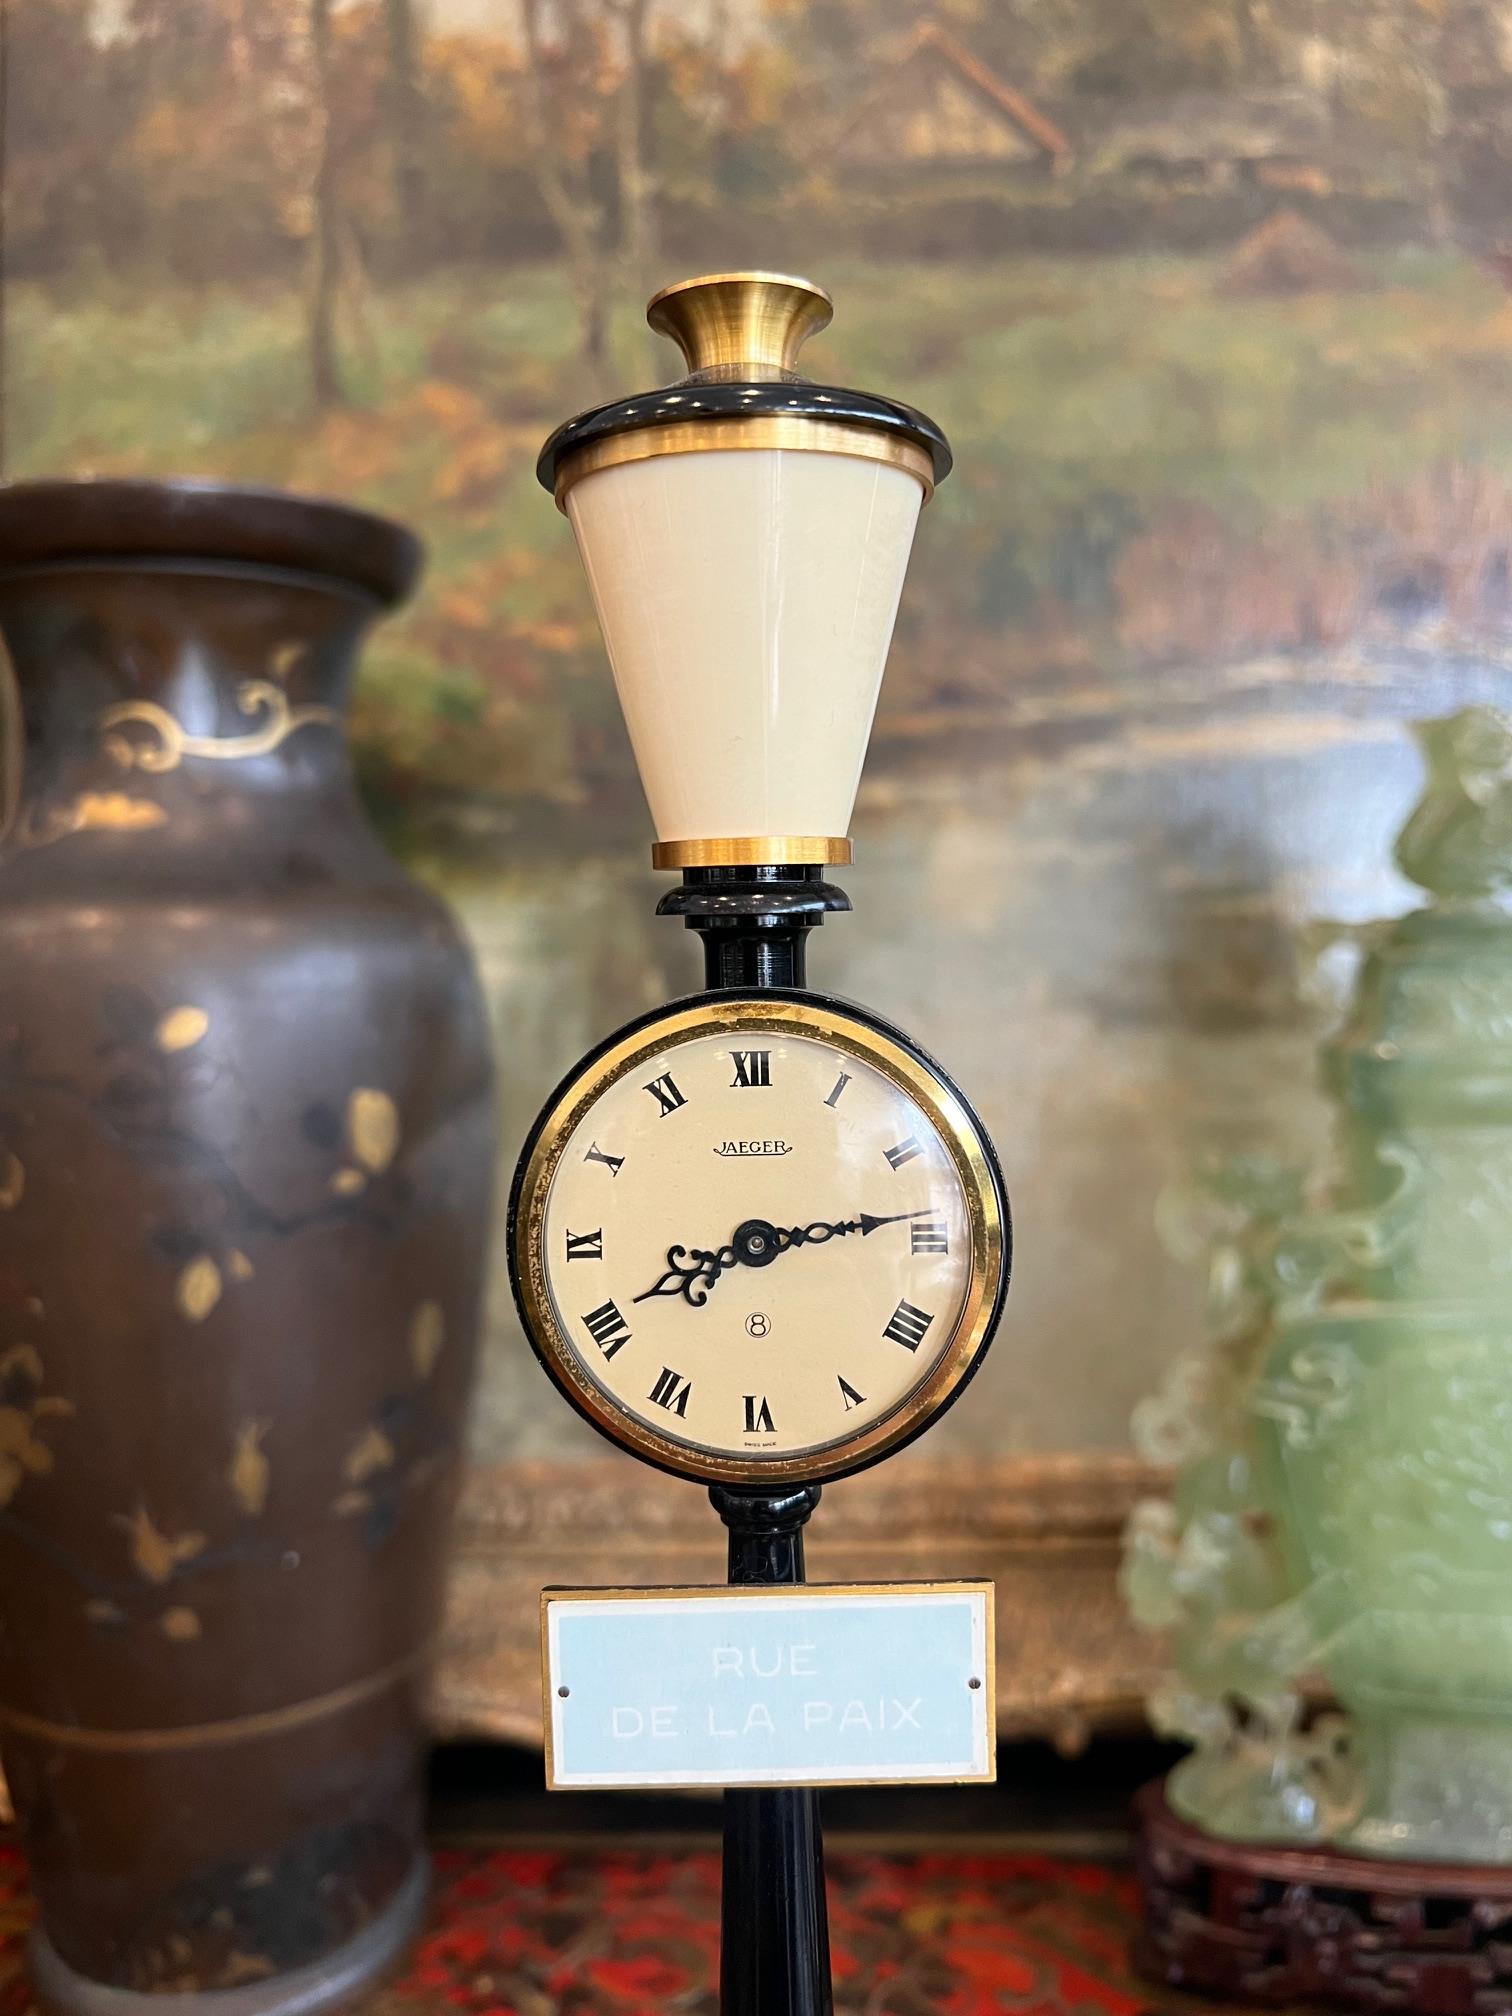 A JAEGER LECOULTRE NOVELTY DESK CLOCK MODELLED AS A LAMP POST - Image 3 of 4